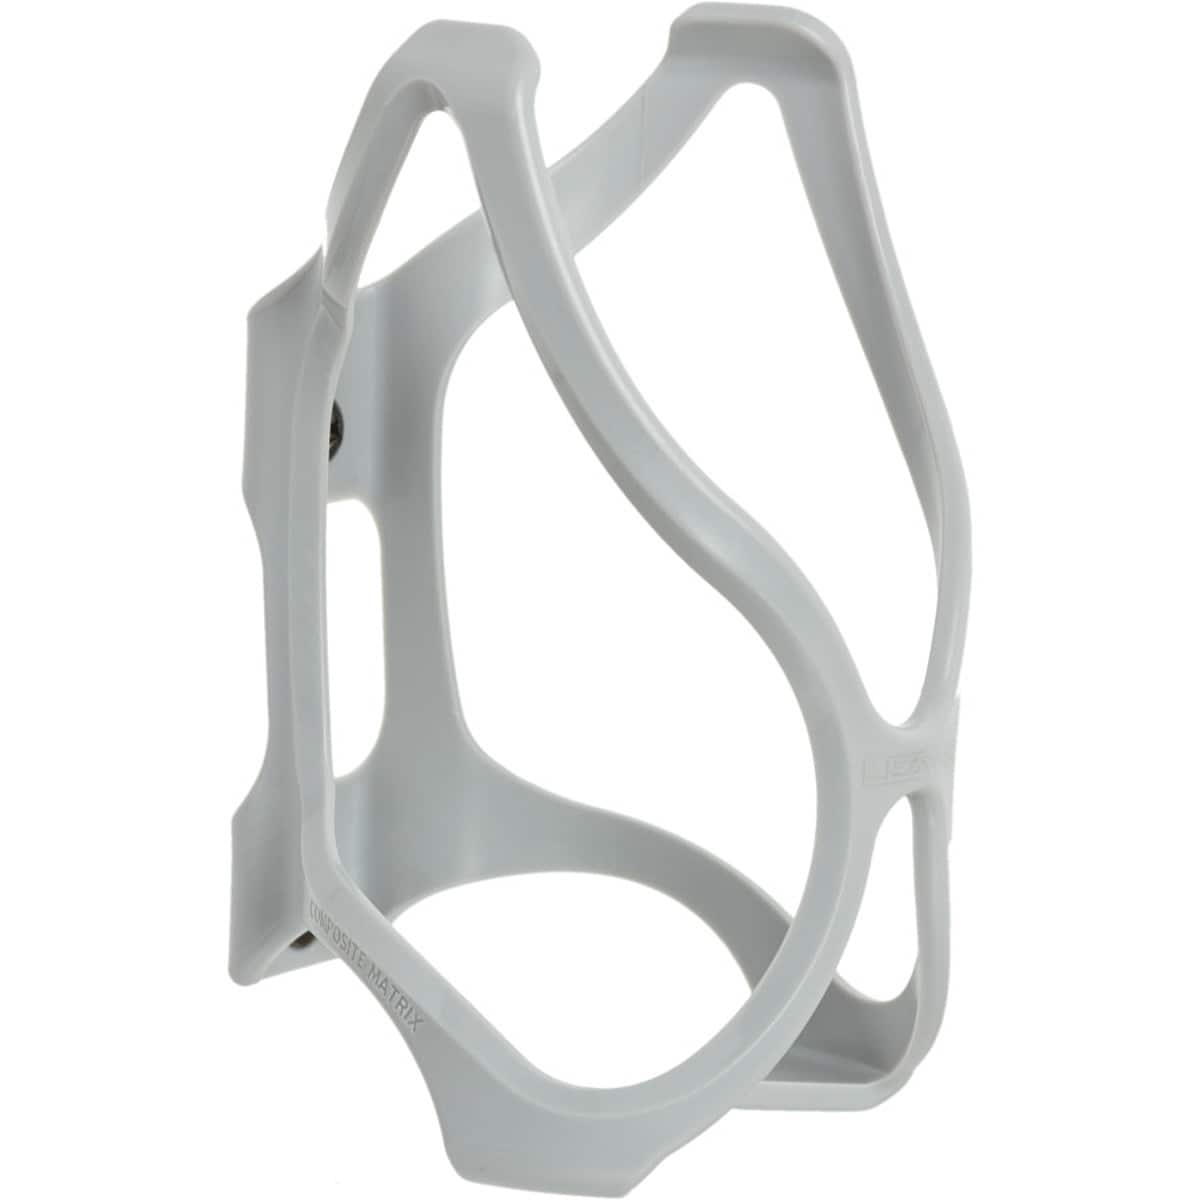 Lezyne Flow Water Bottle Cage